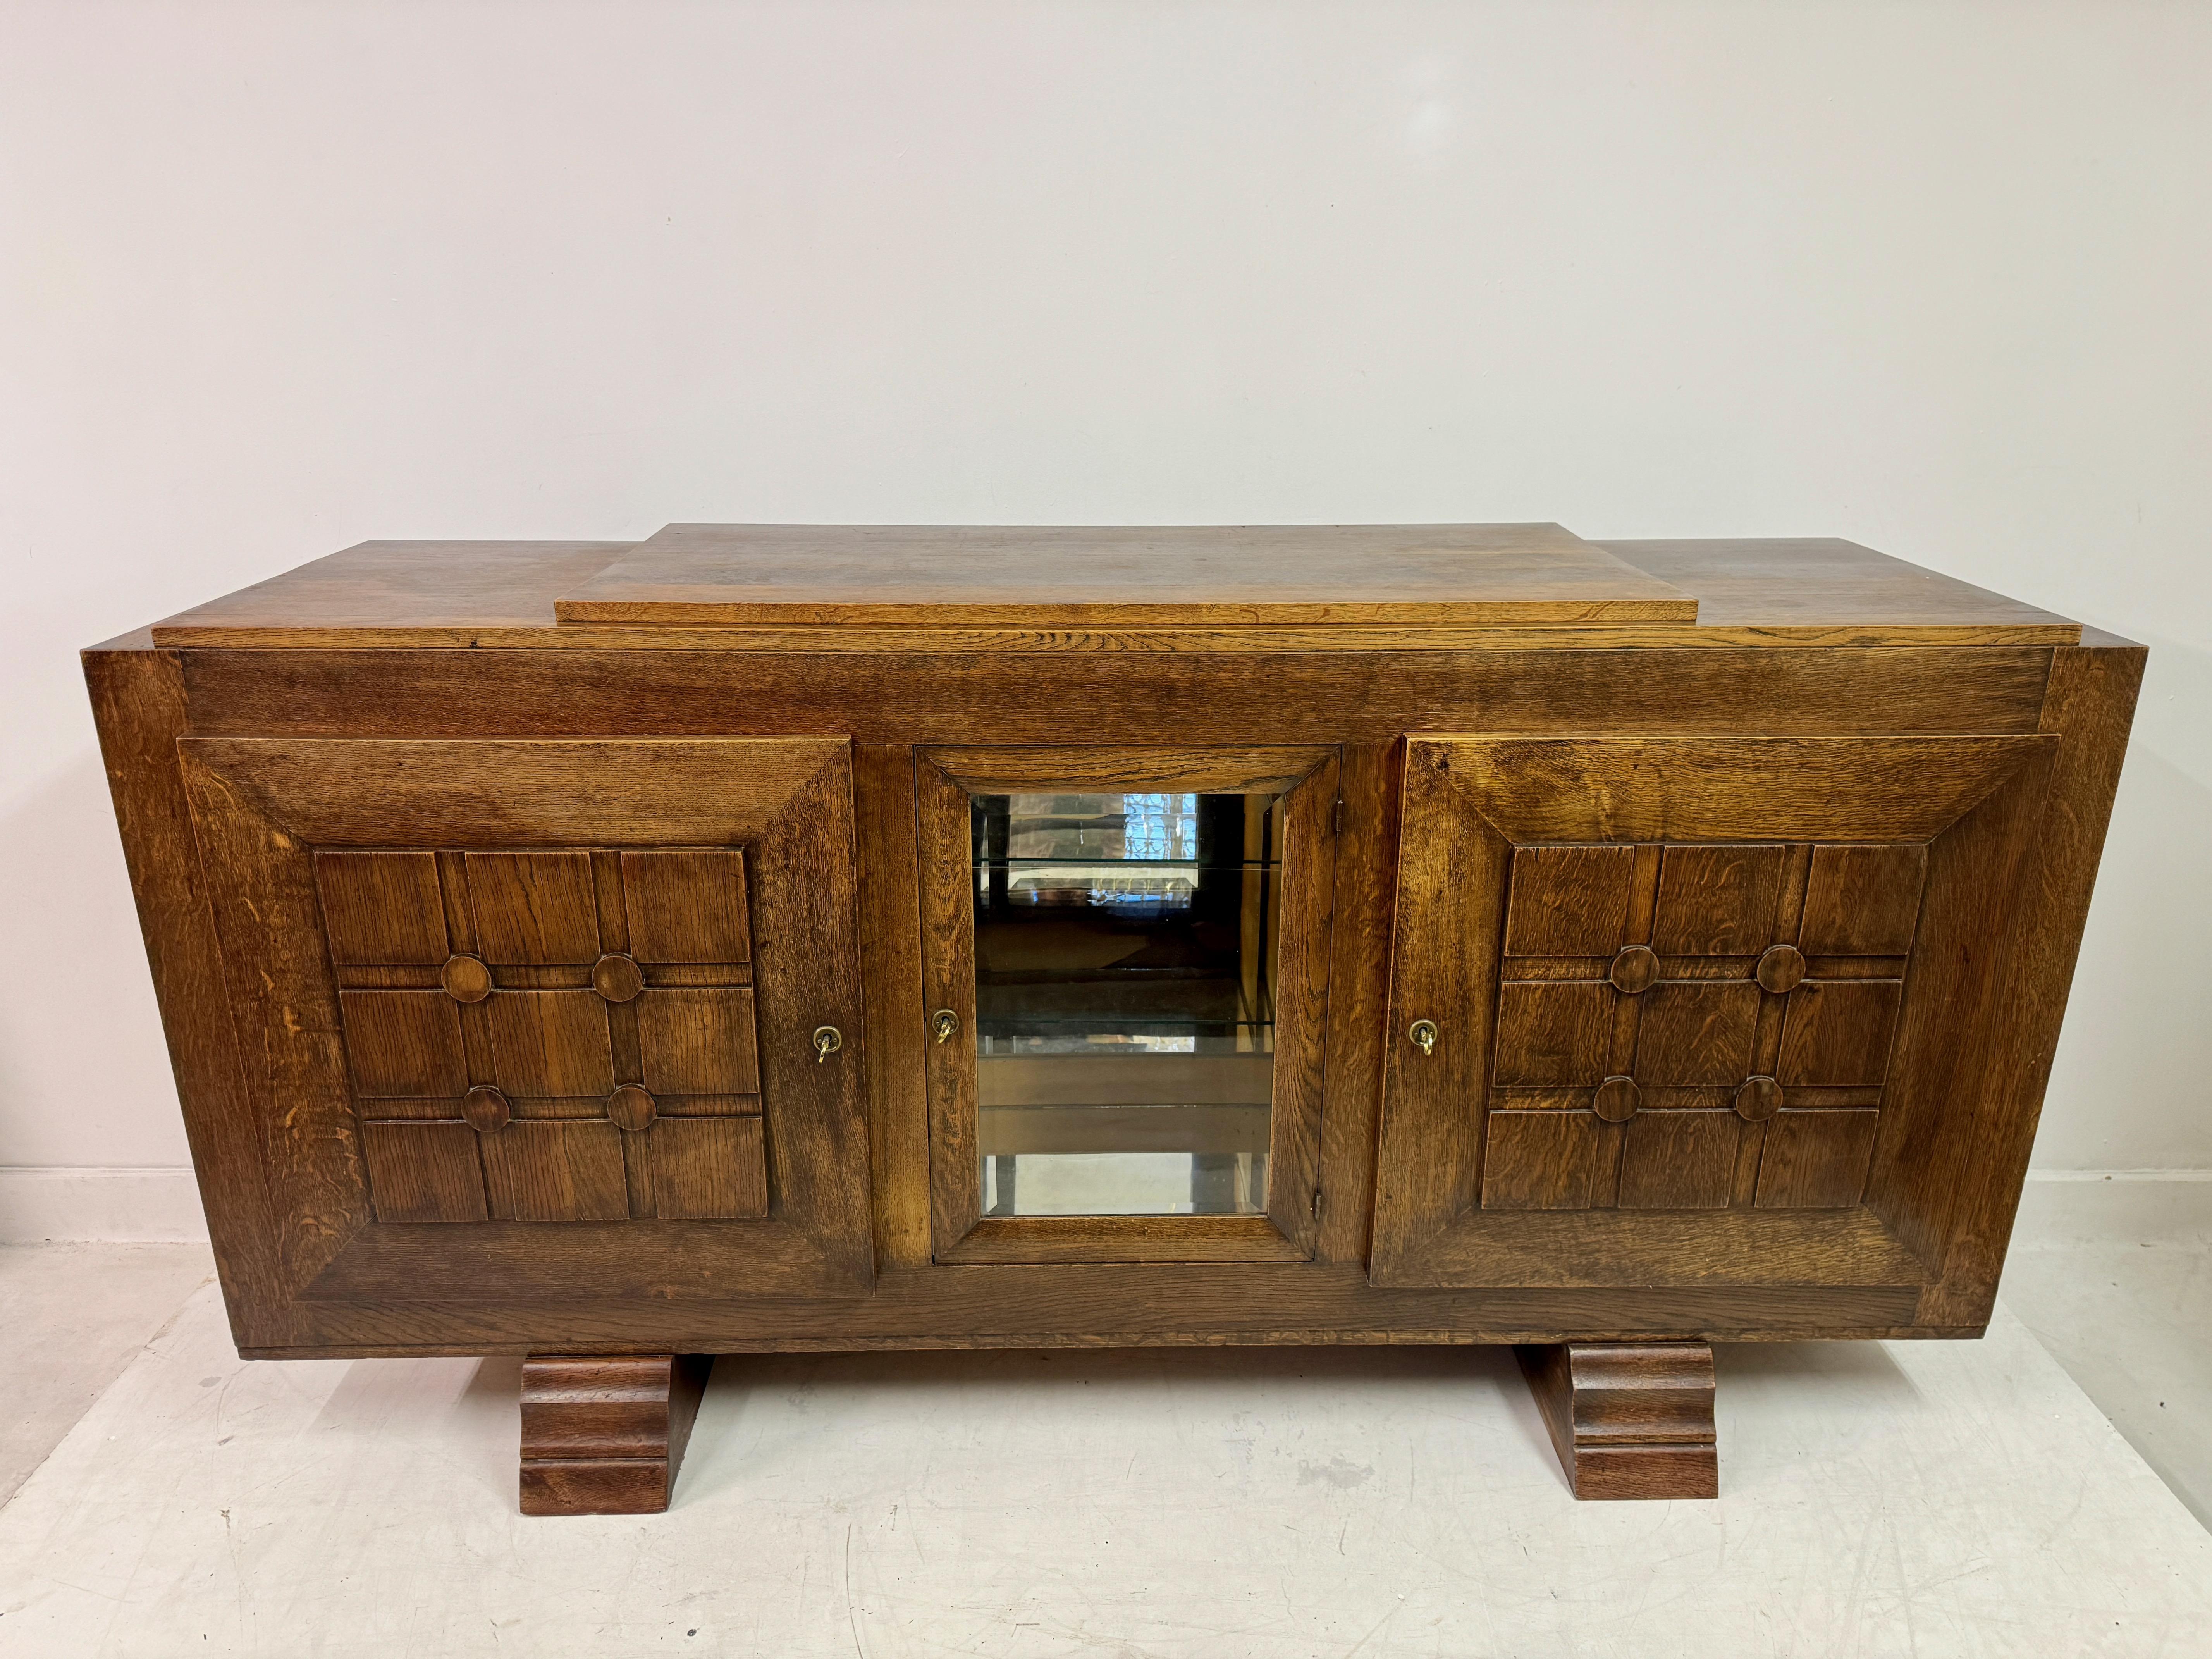 1930s French Oak Sideboard By Gaston Poisson In Good Condition For Sale In London, London